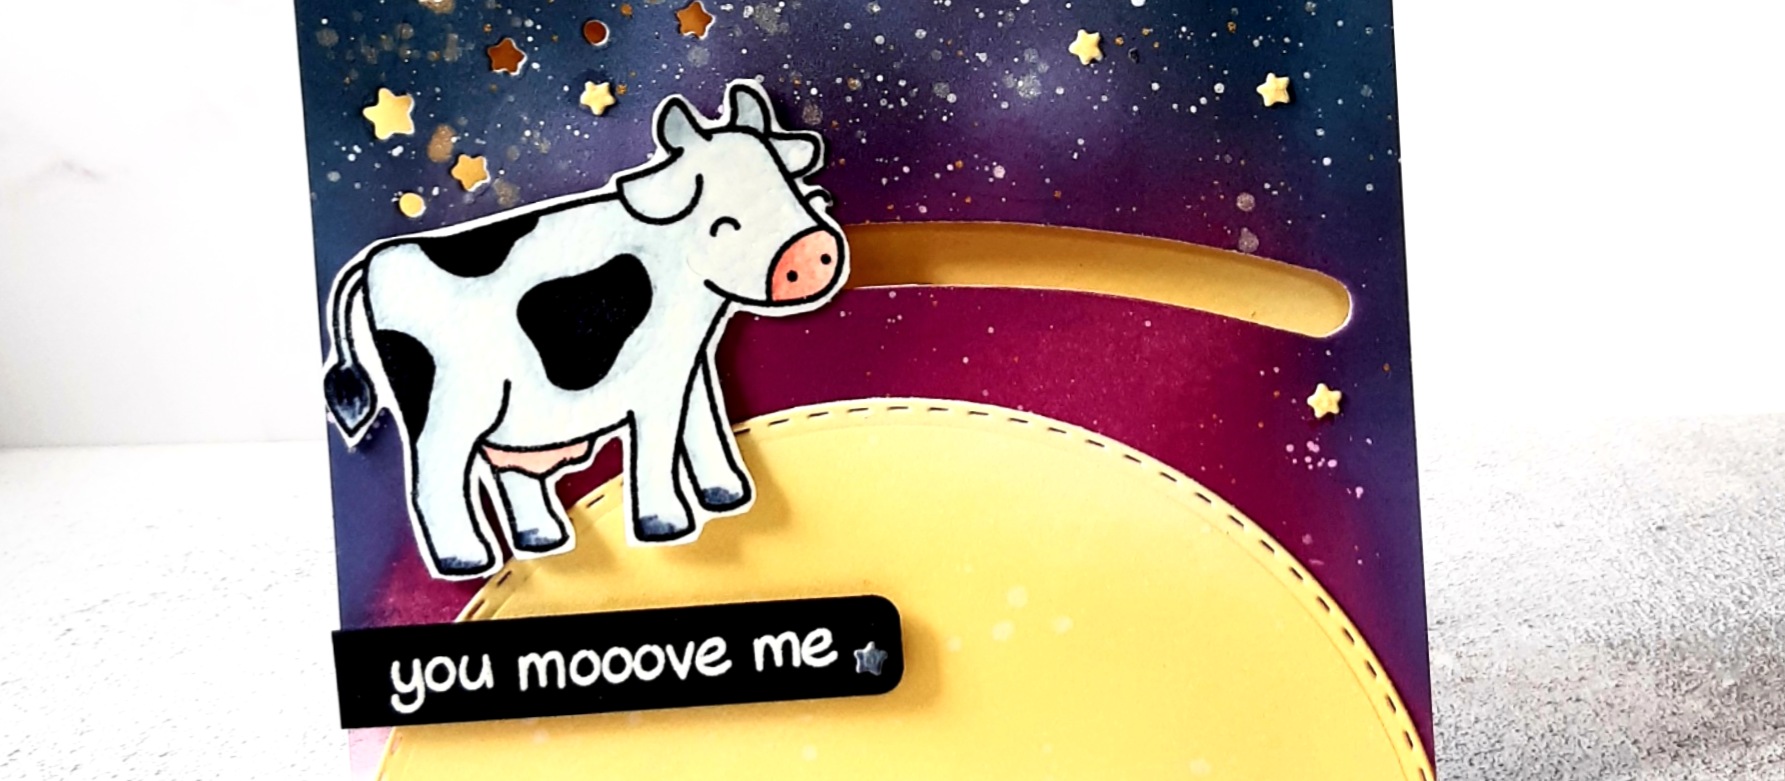 The Cow Jumps over the moon